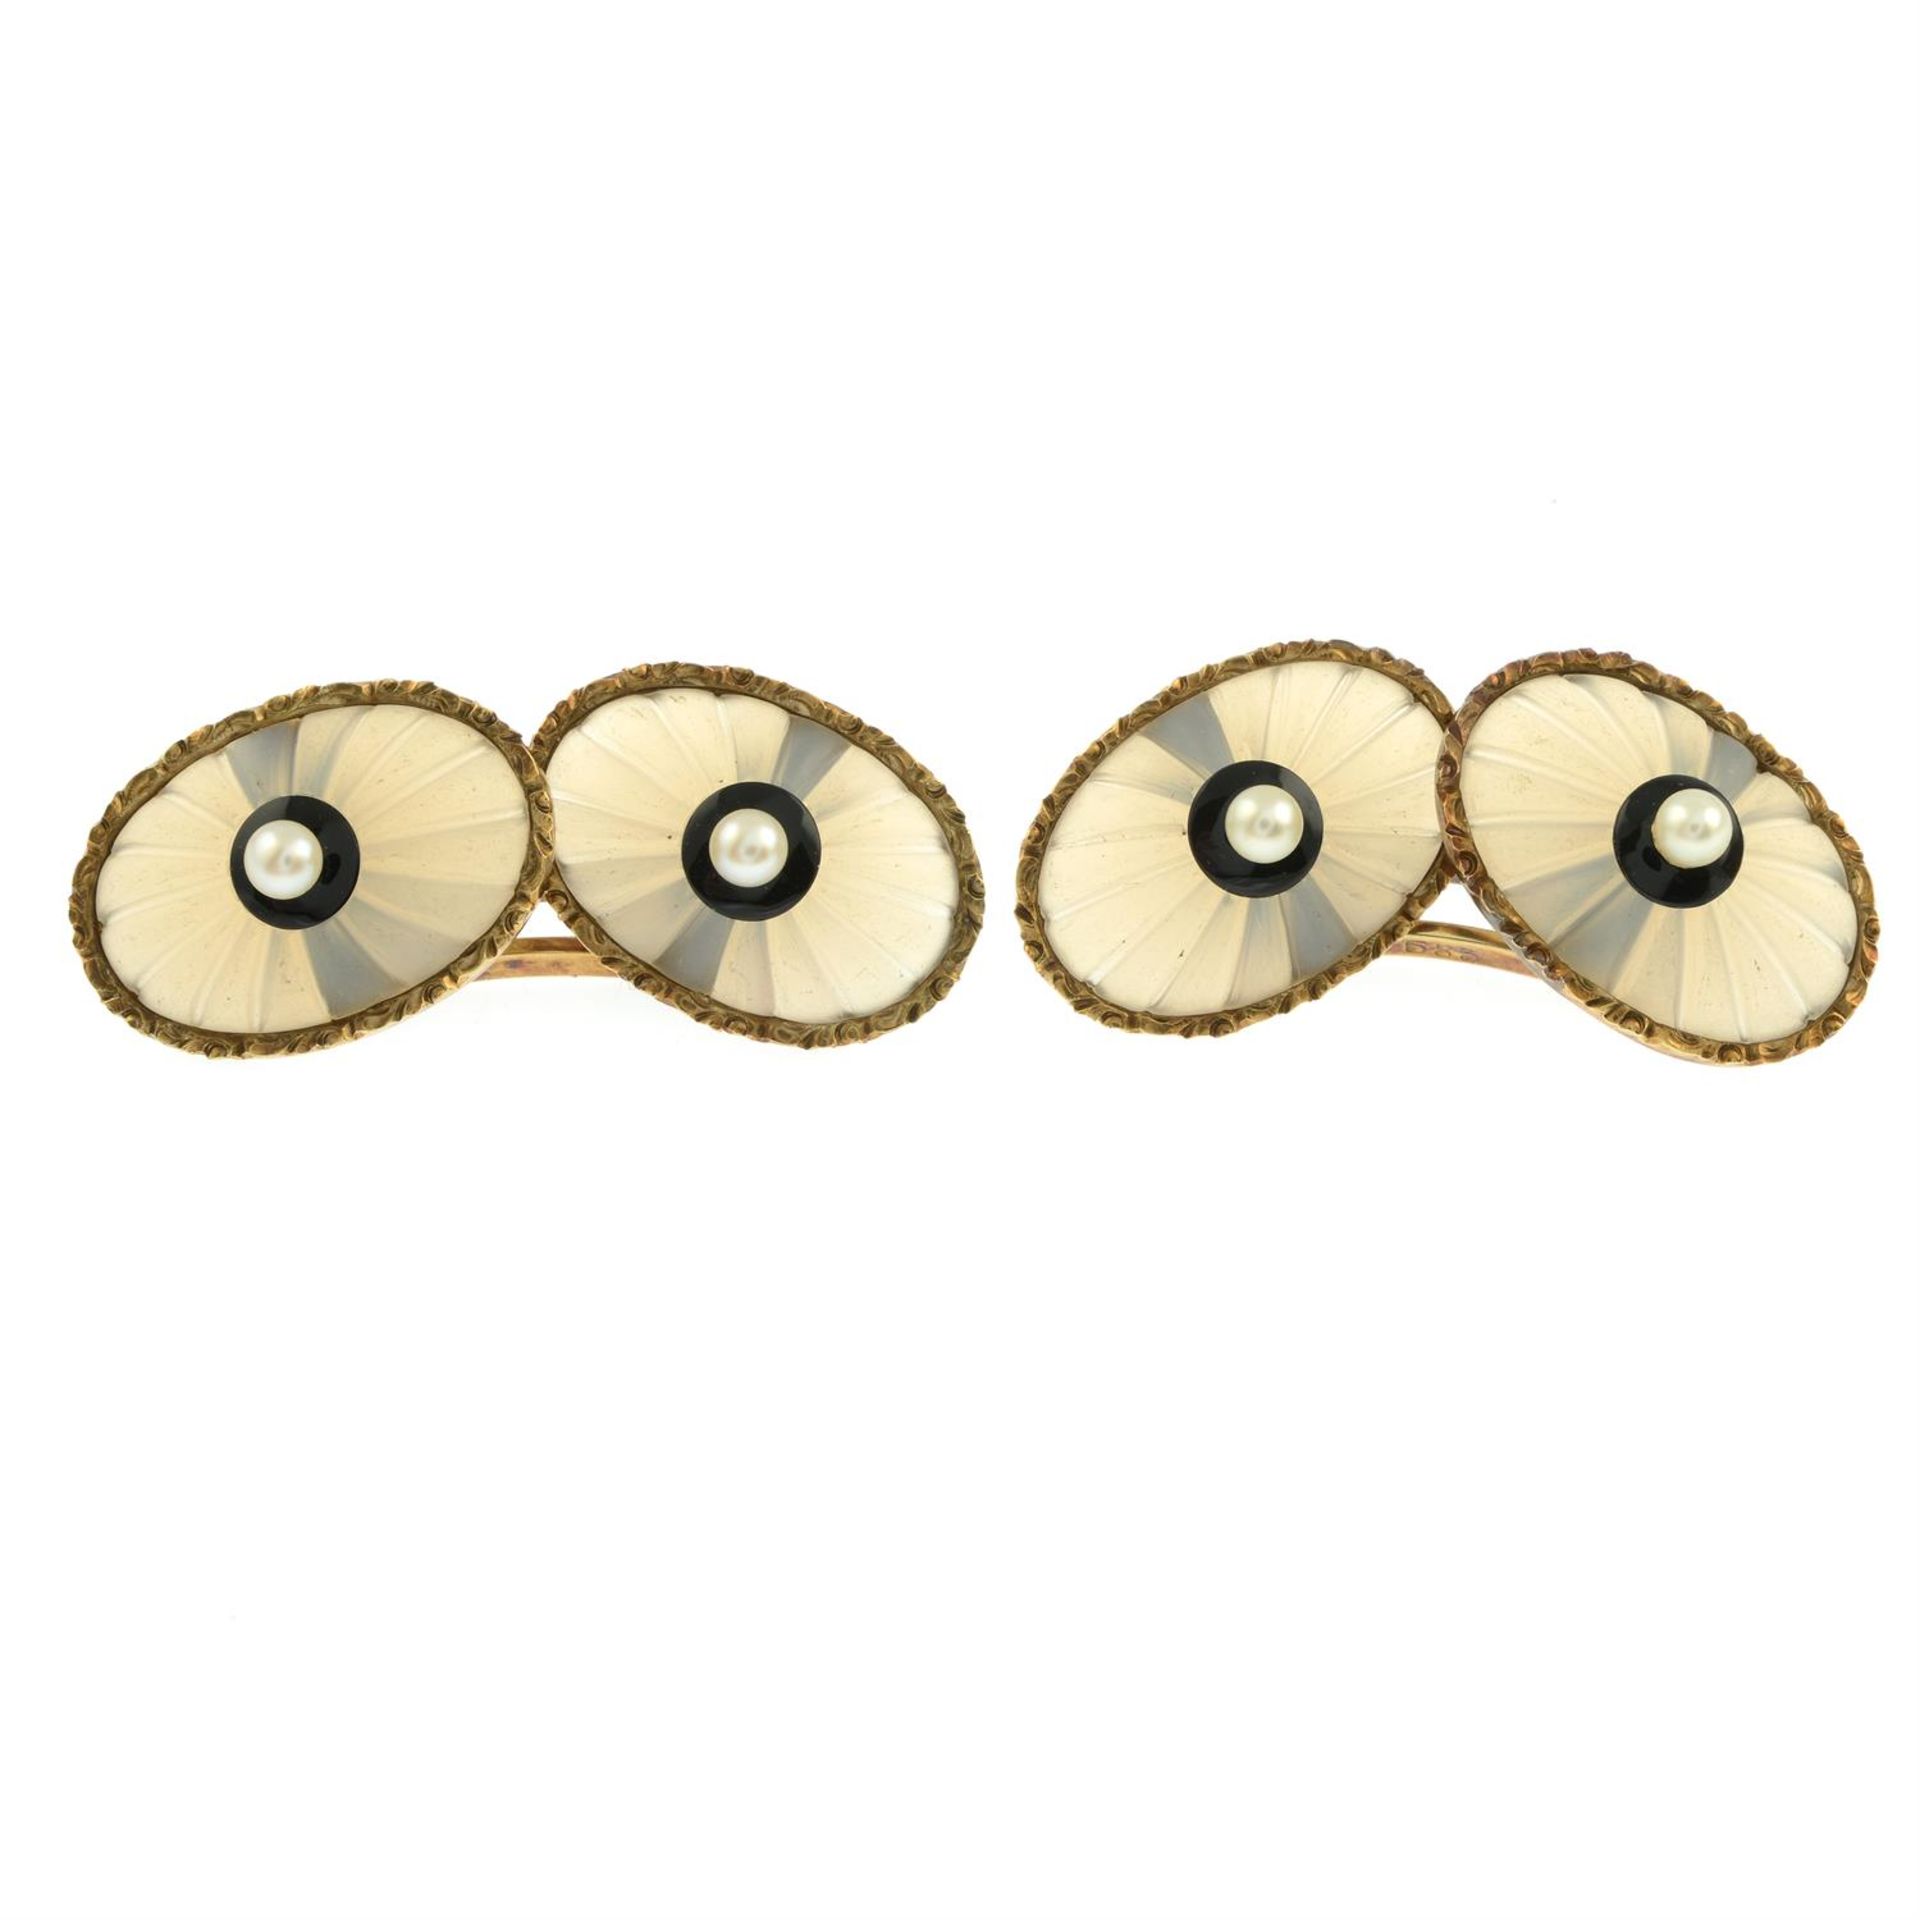 A pair of early to mid 20th century 14ct gold seed pearl, onyx and frosted rock crystal cufflinks. - Image 2 of 3